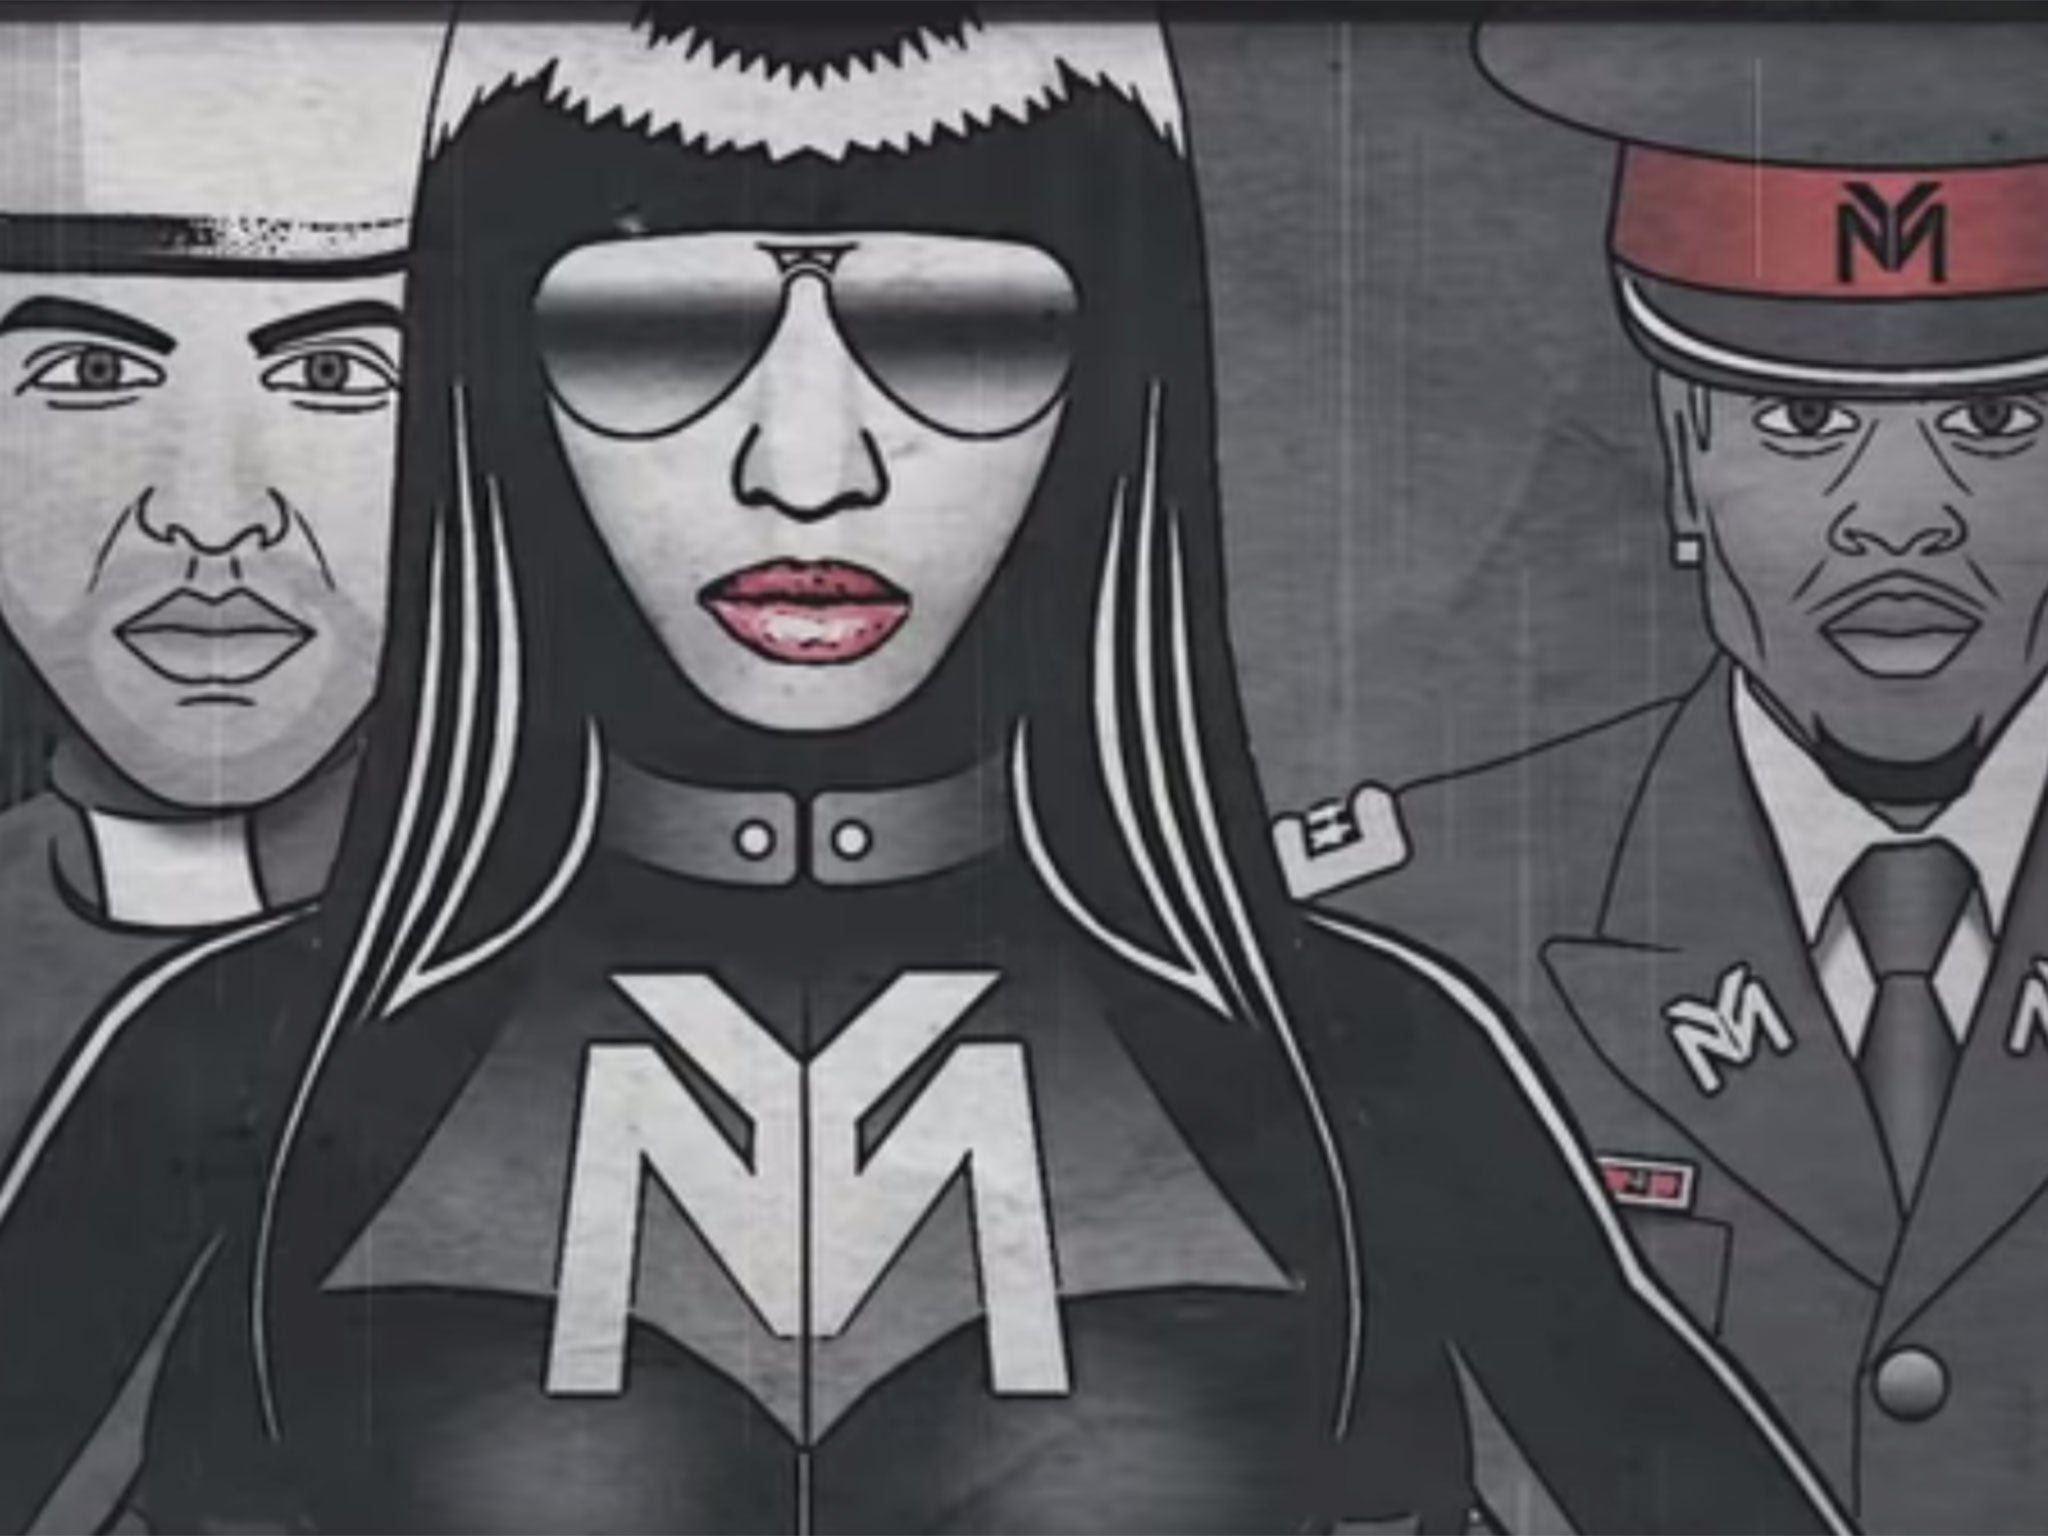 Nicki Minaj's lyric video for 'Only' features Drake as the Pope, Minaj as a dictator and Chris Brown as an army leader